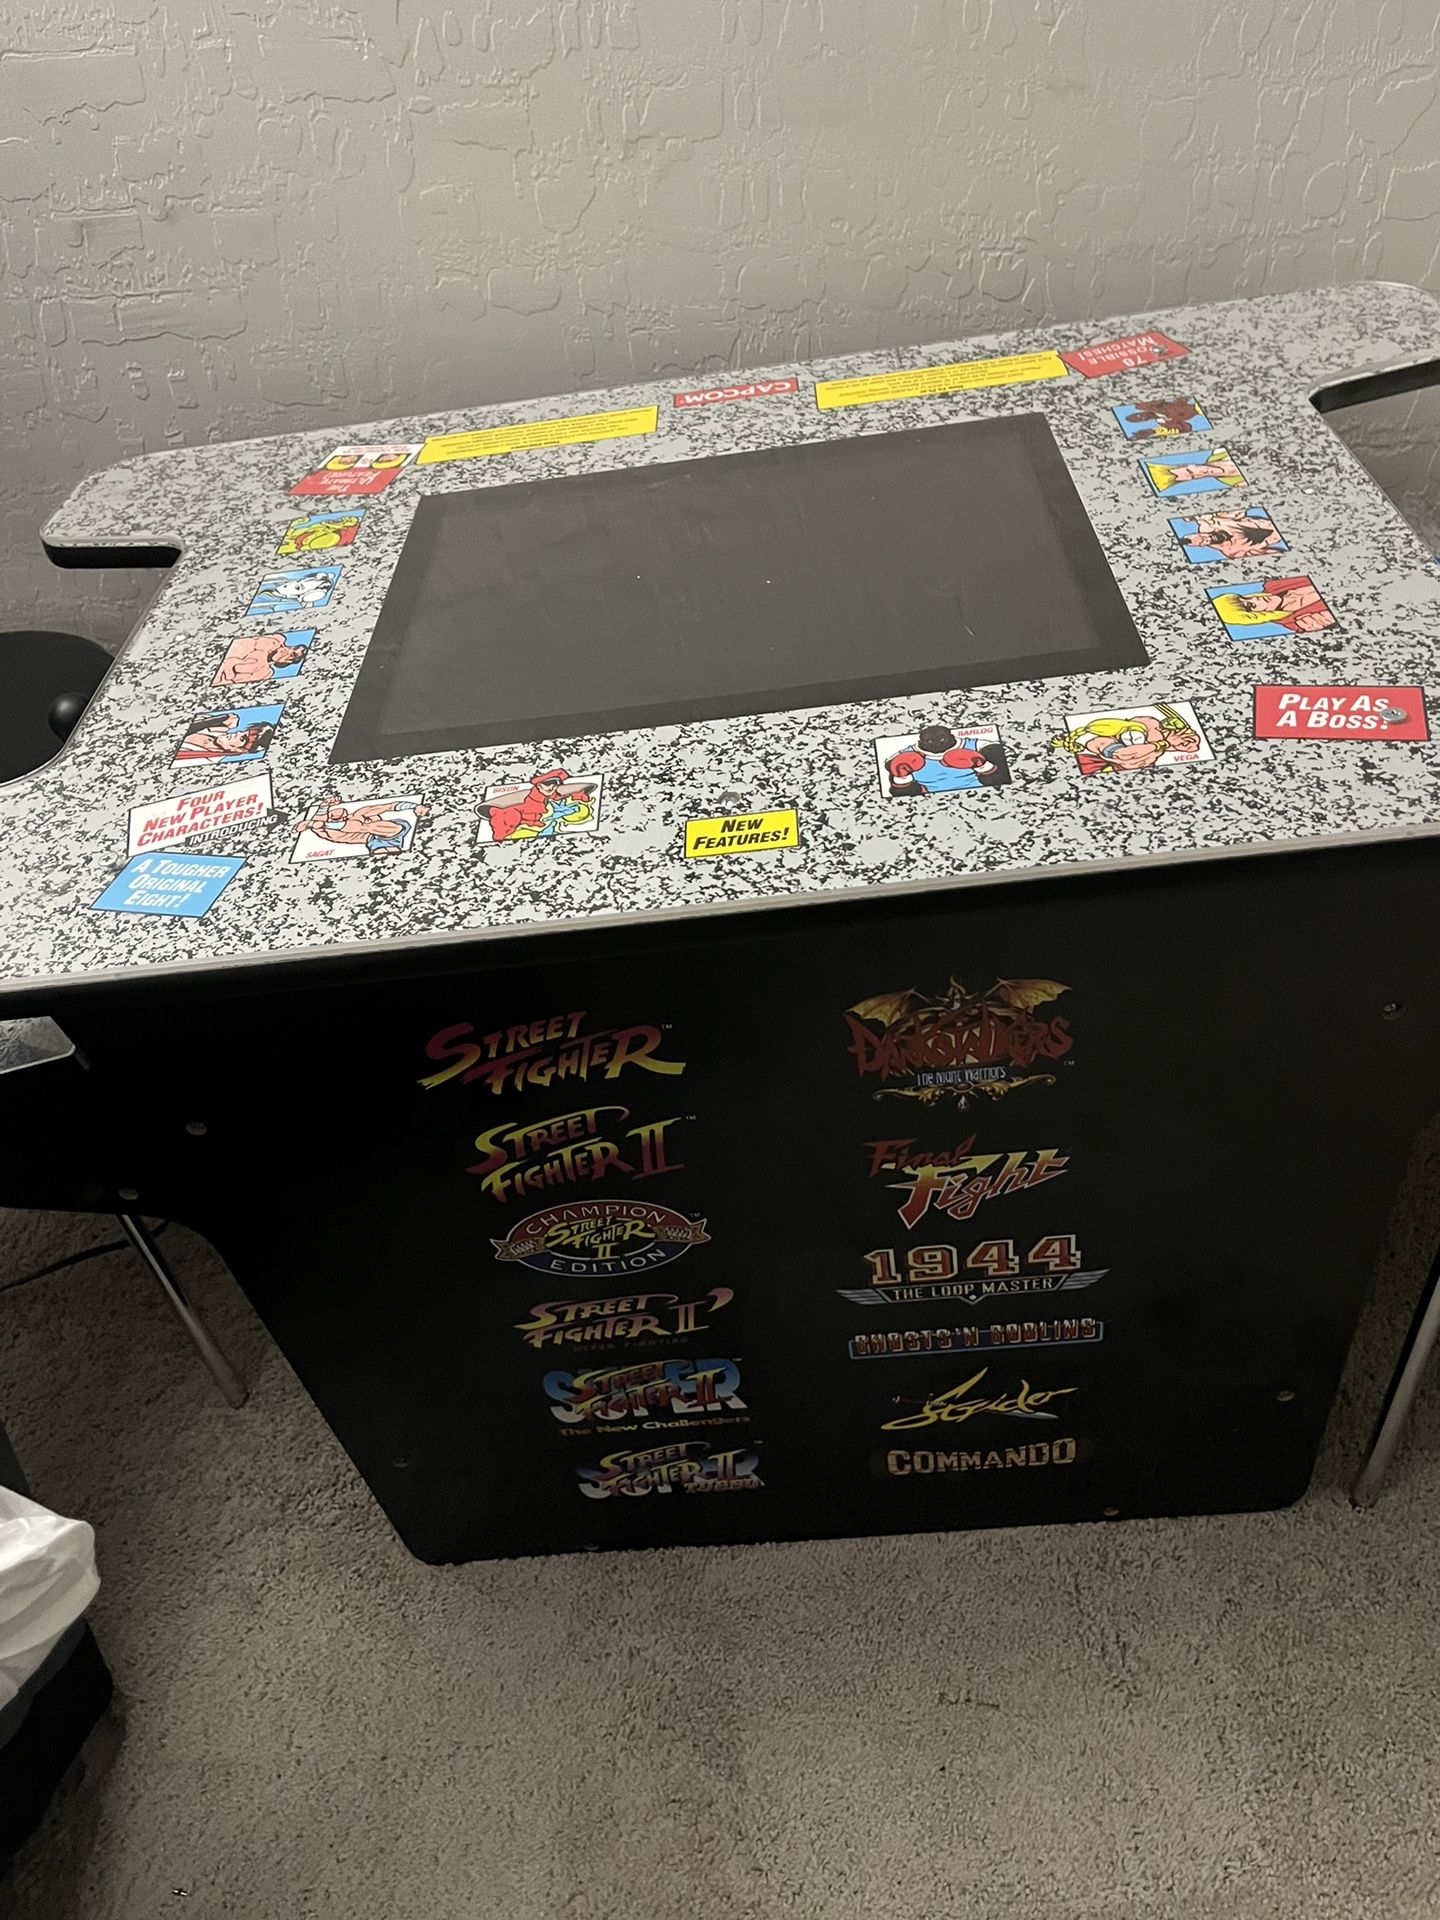 $300  - Arcade1UP - STREET FIGHTER - COCKTAIL TABLE ARCADE - 12 GAMES. 